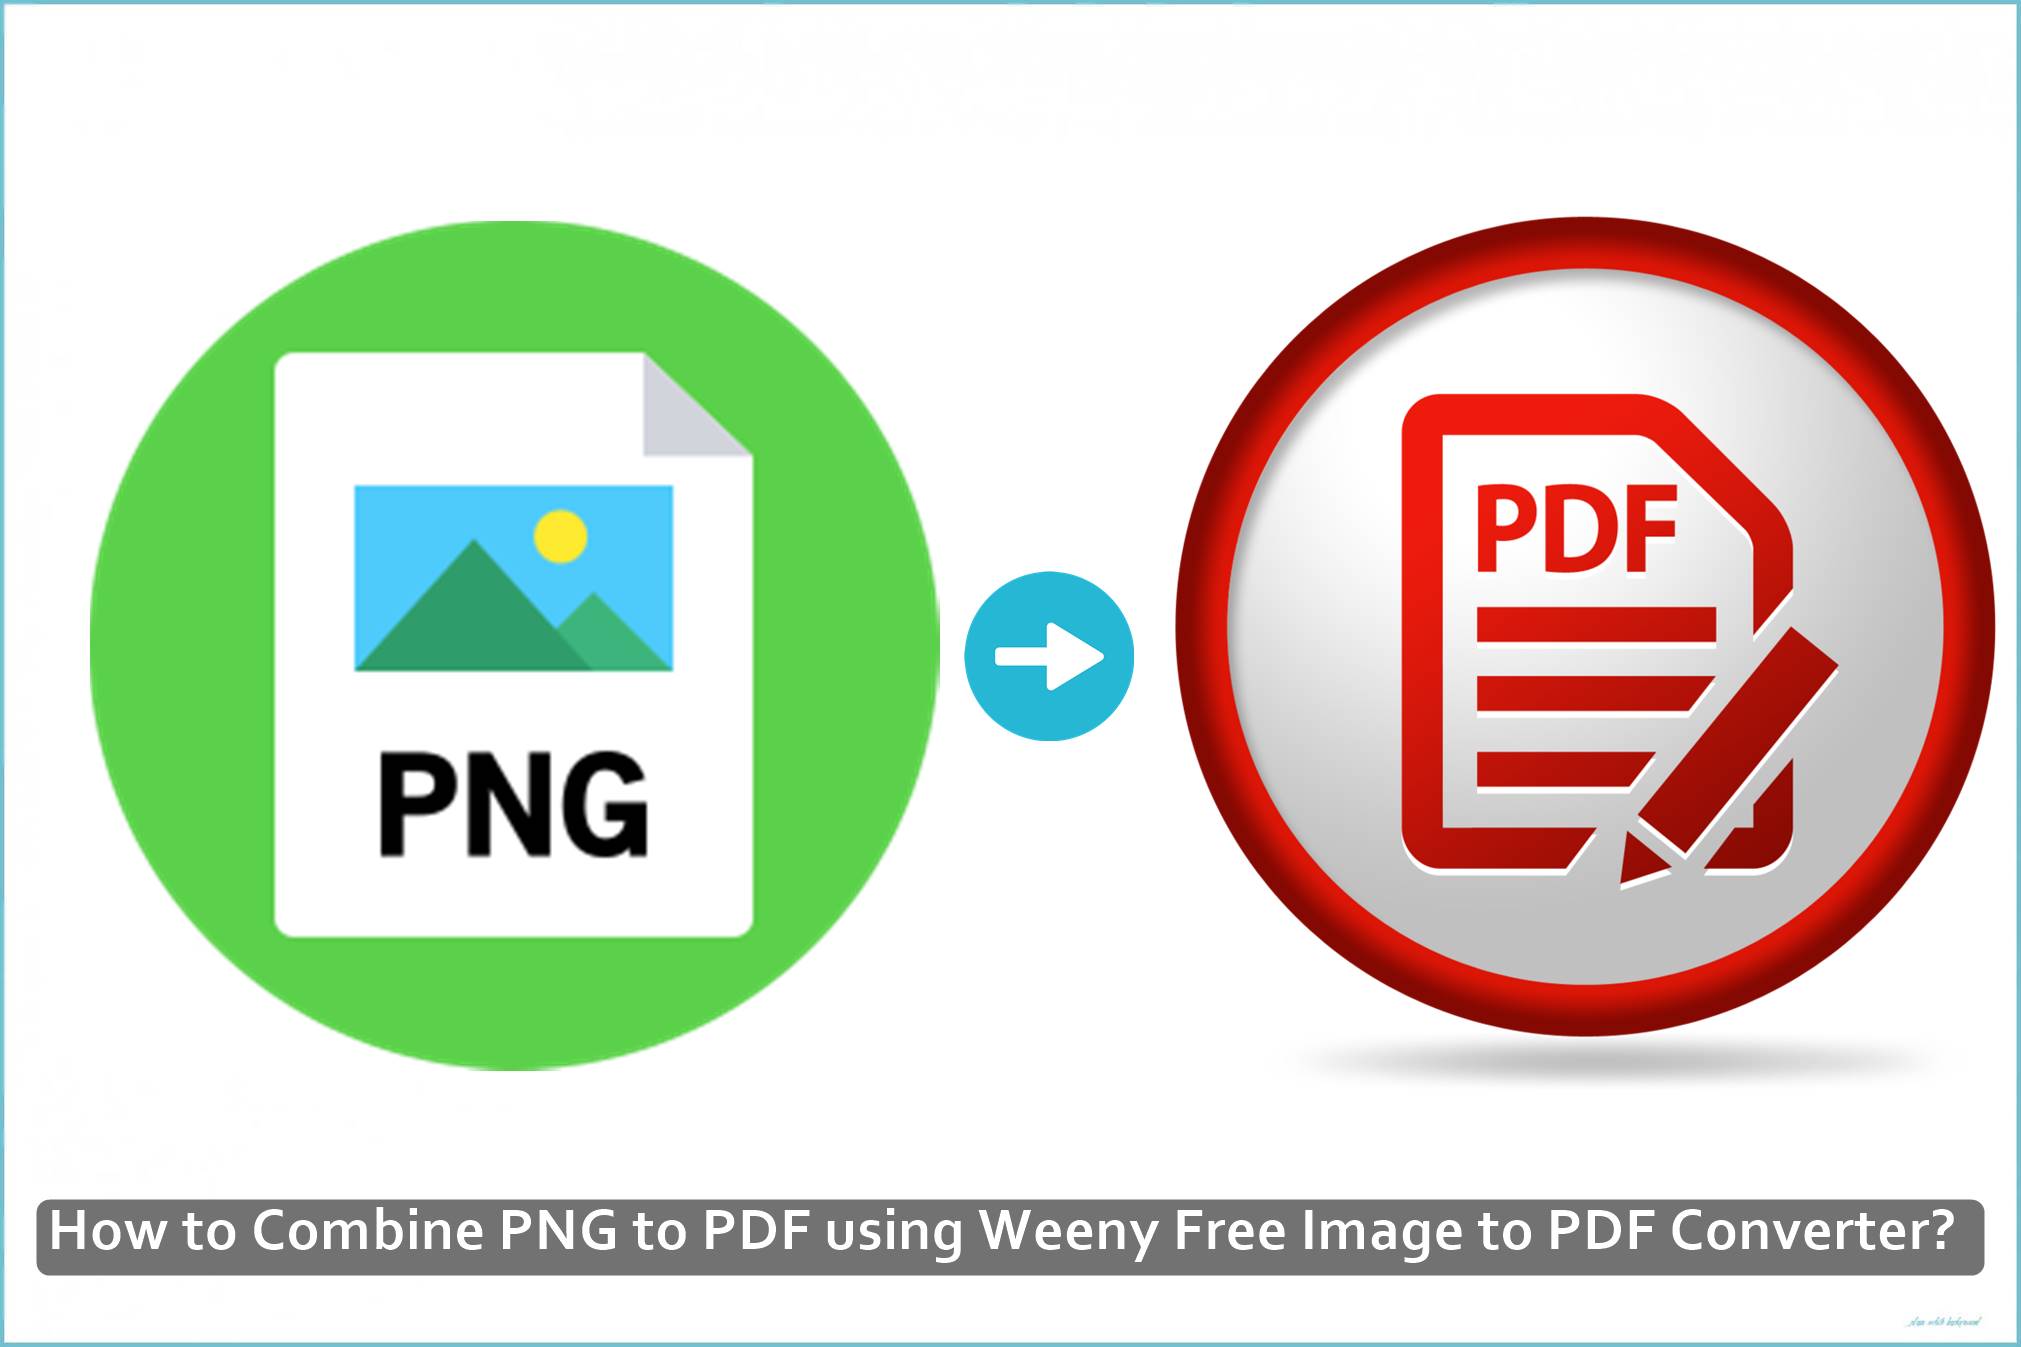 How to Combine PNG to PDF using Weeny Free Image to PDF Converter?